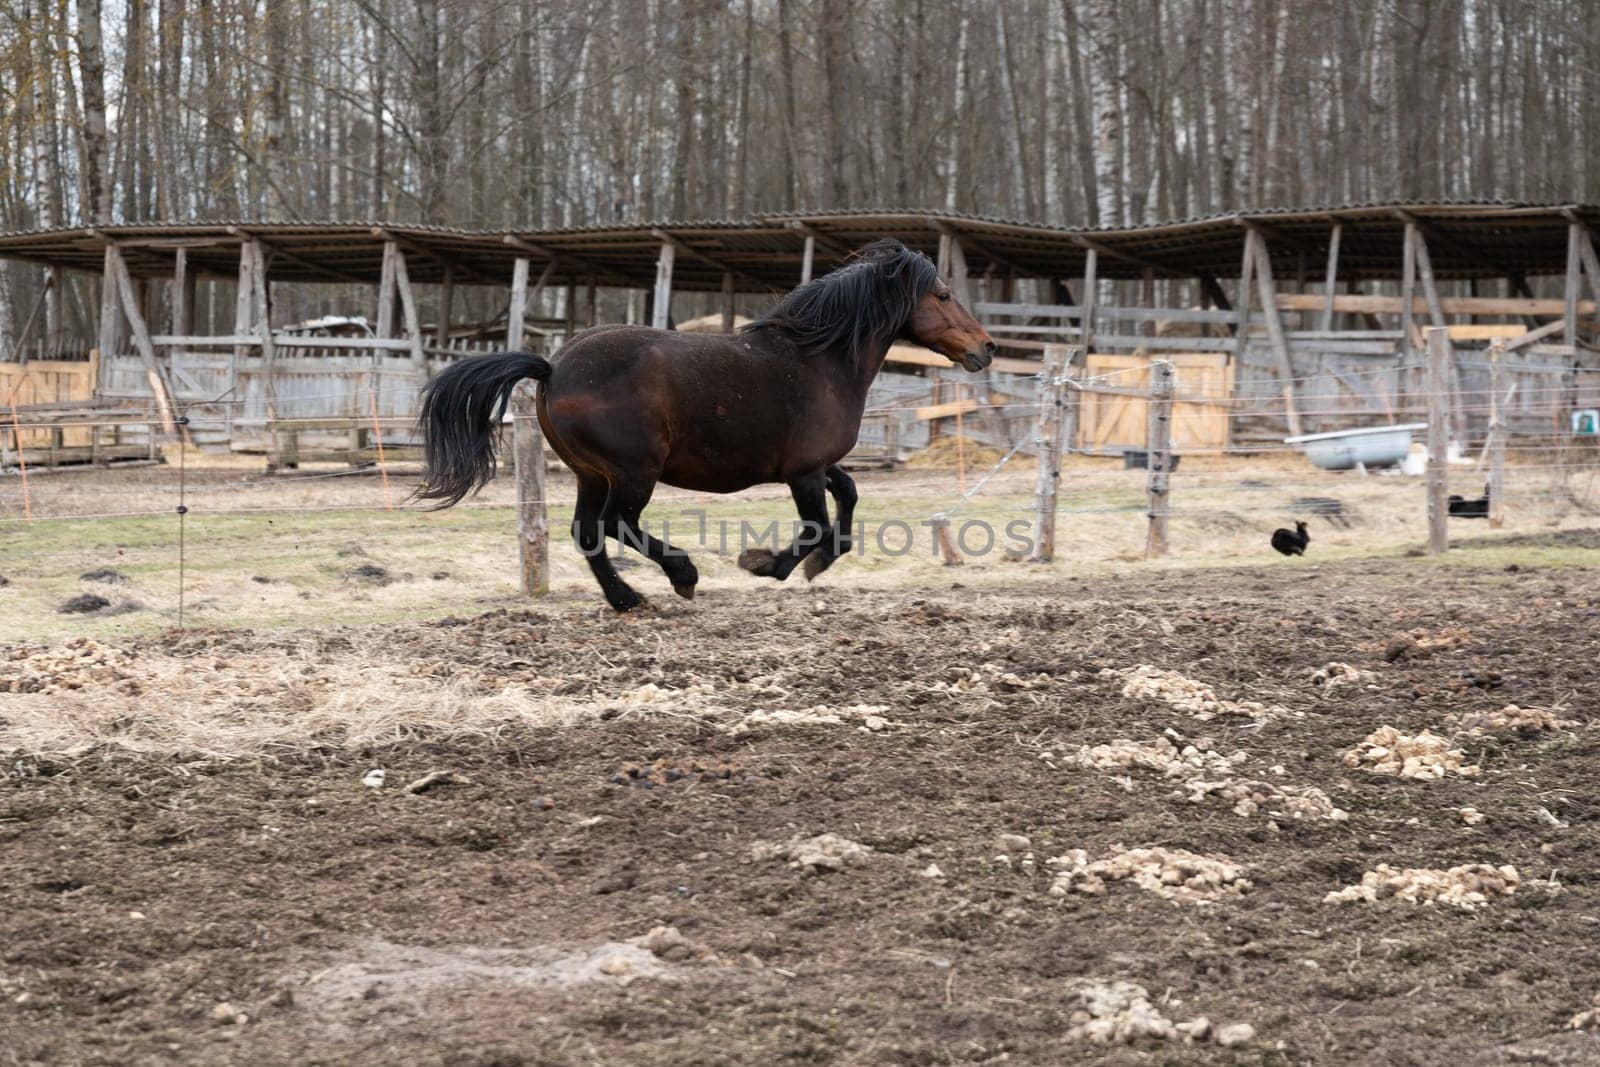 A powerful horse is galloping energetically within a secure fenced area, displaying its strength and speed as it moves gracefully across the enclosed space.